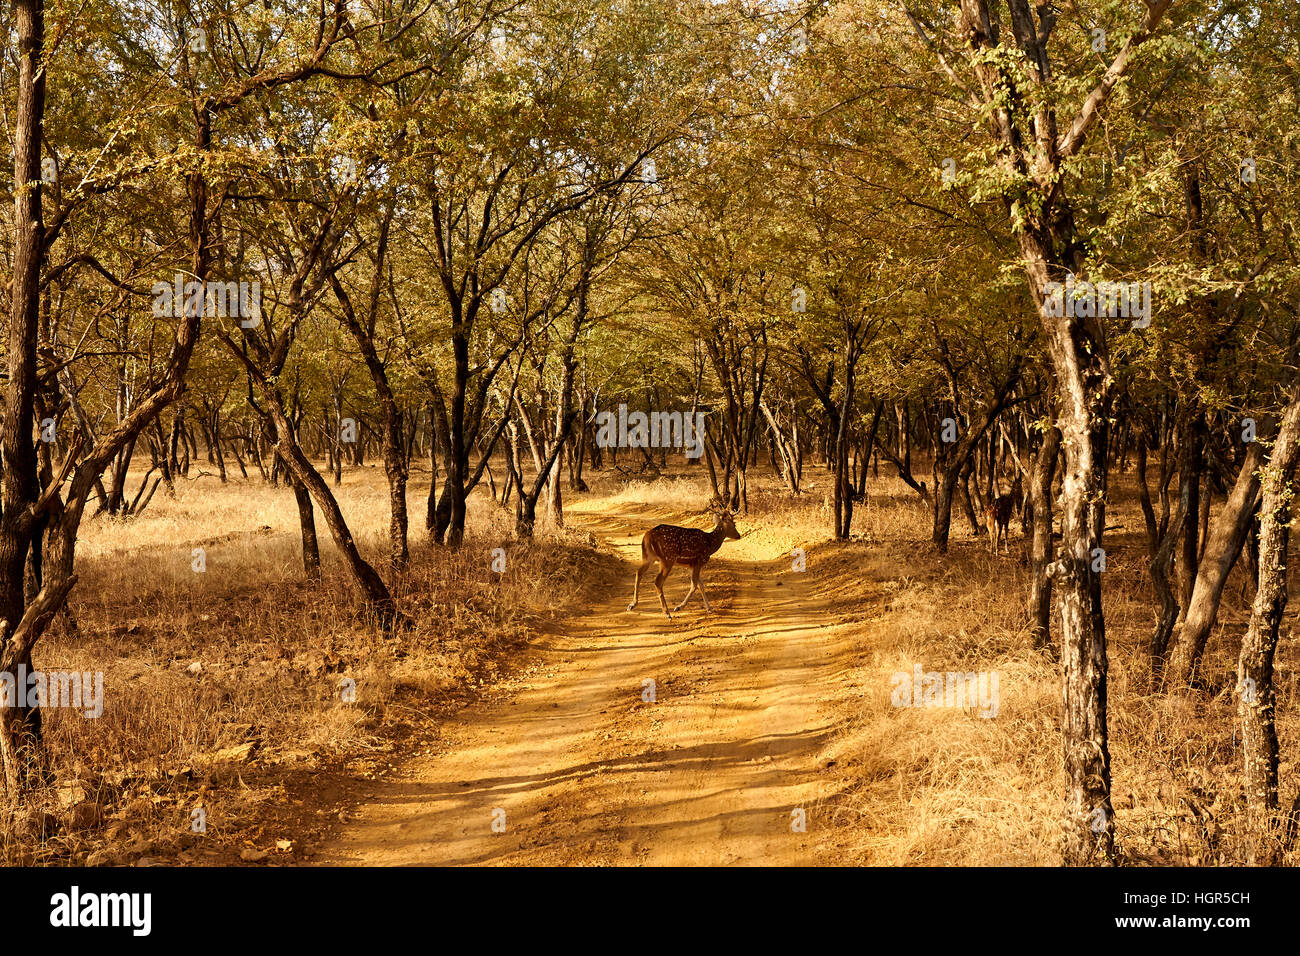 Spotted deers or chitals (Axis axis) in natural habitat, Ranthambore National Park, India Stock Photo